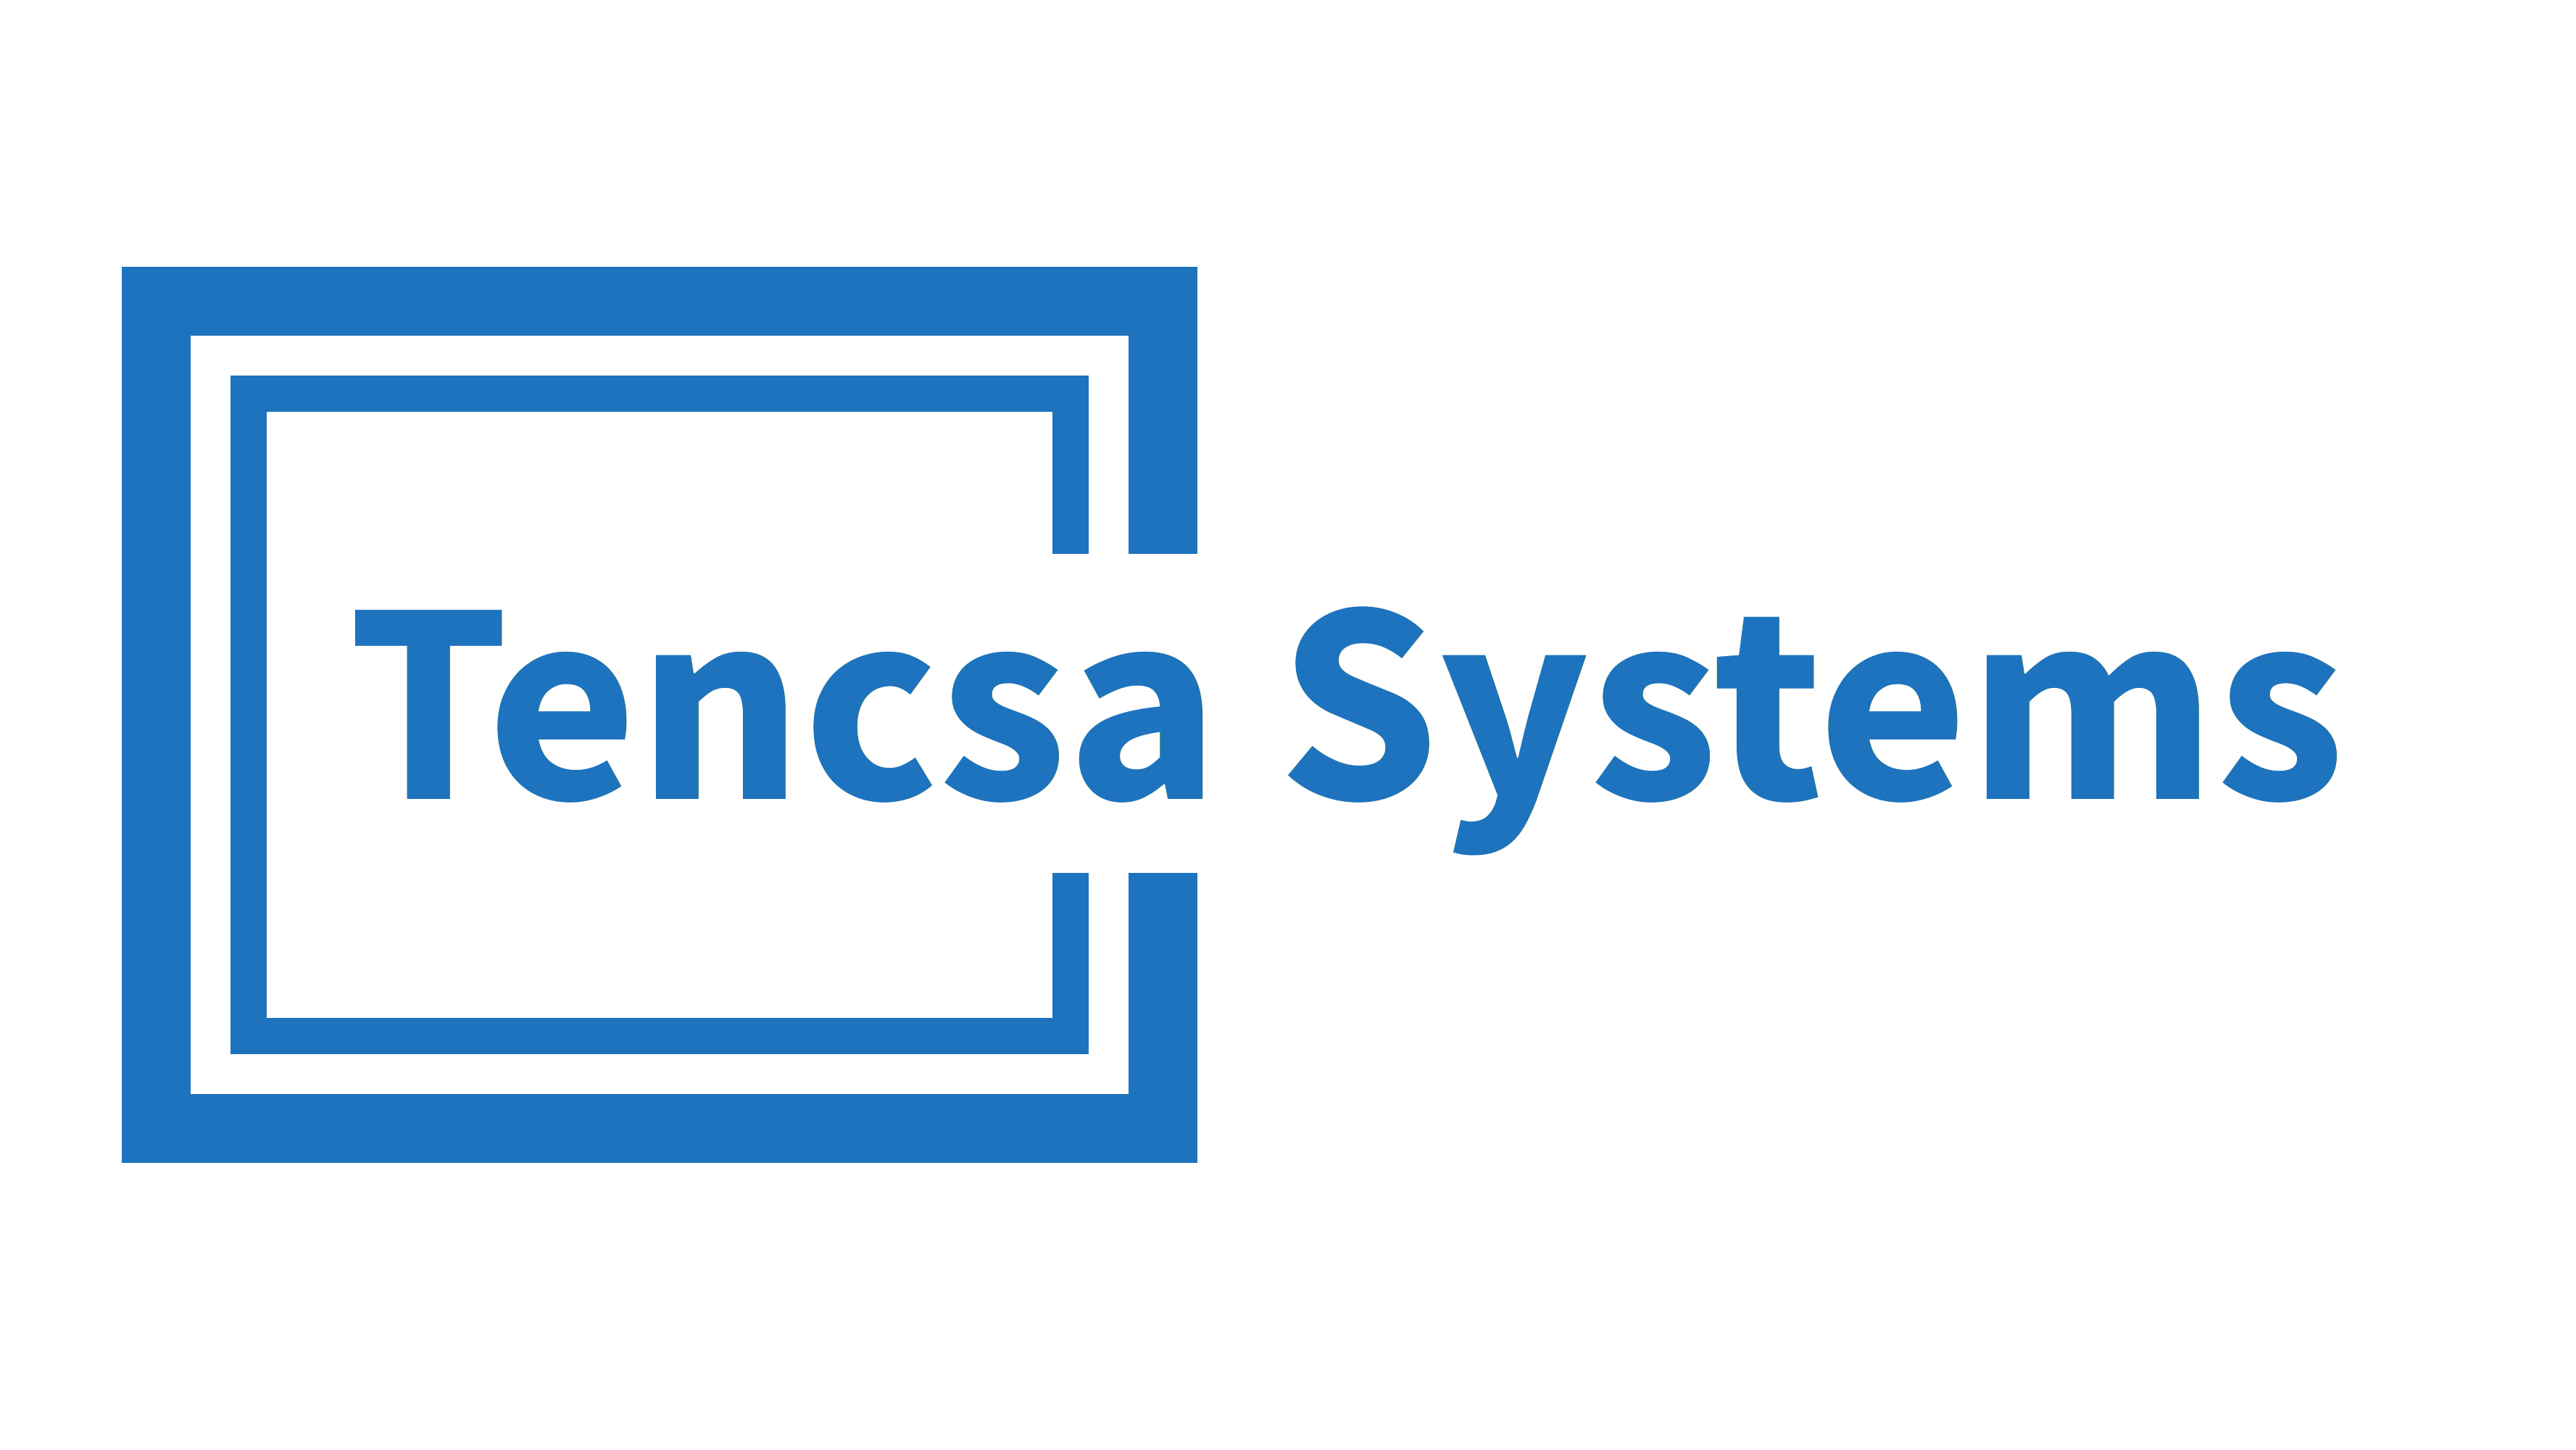 Tencsa Systems